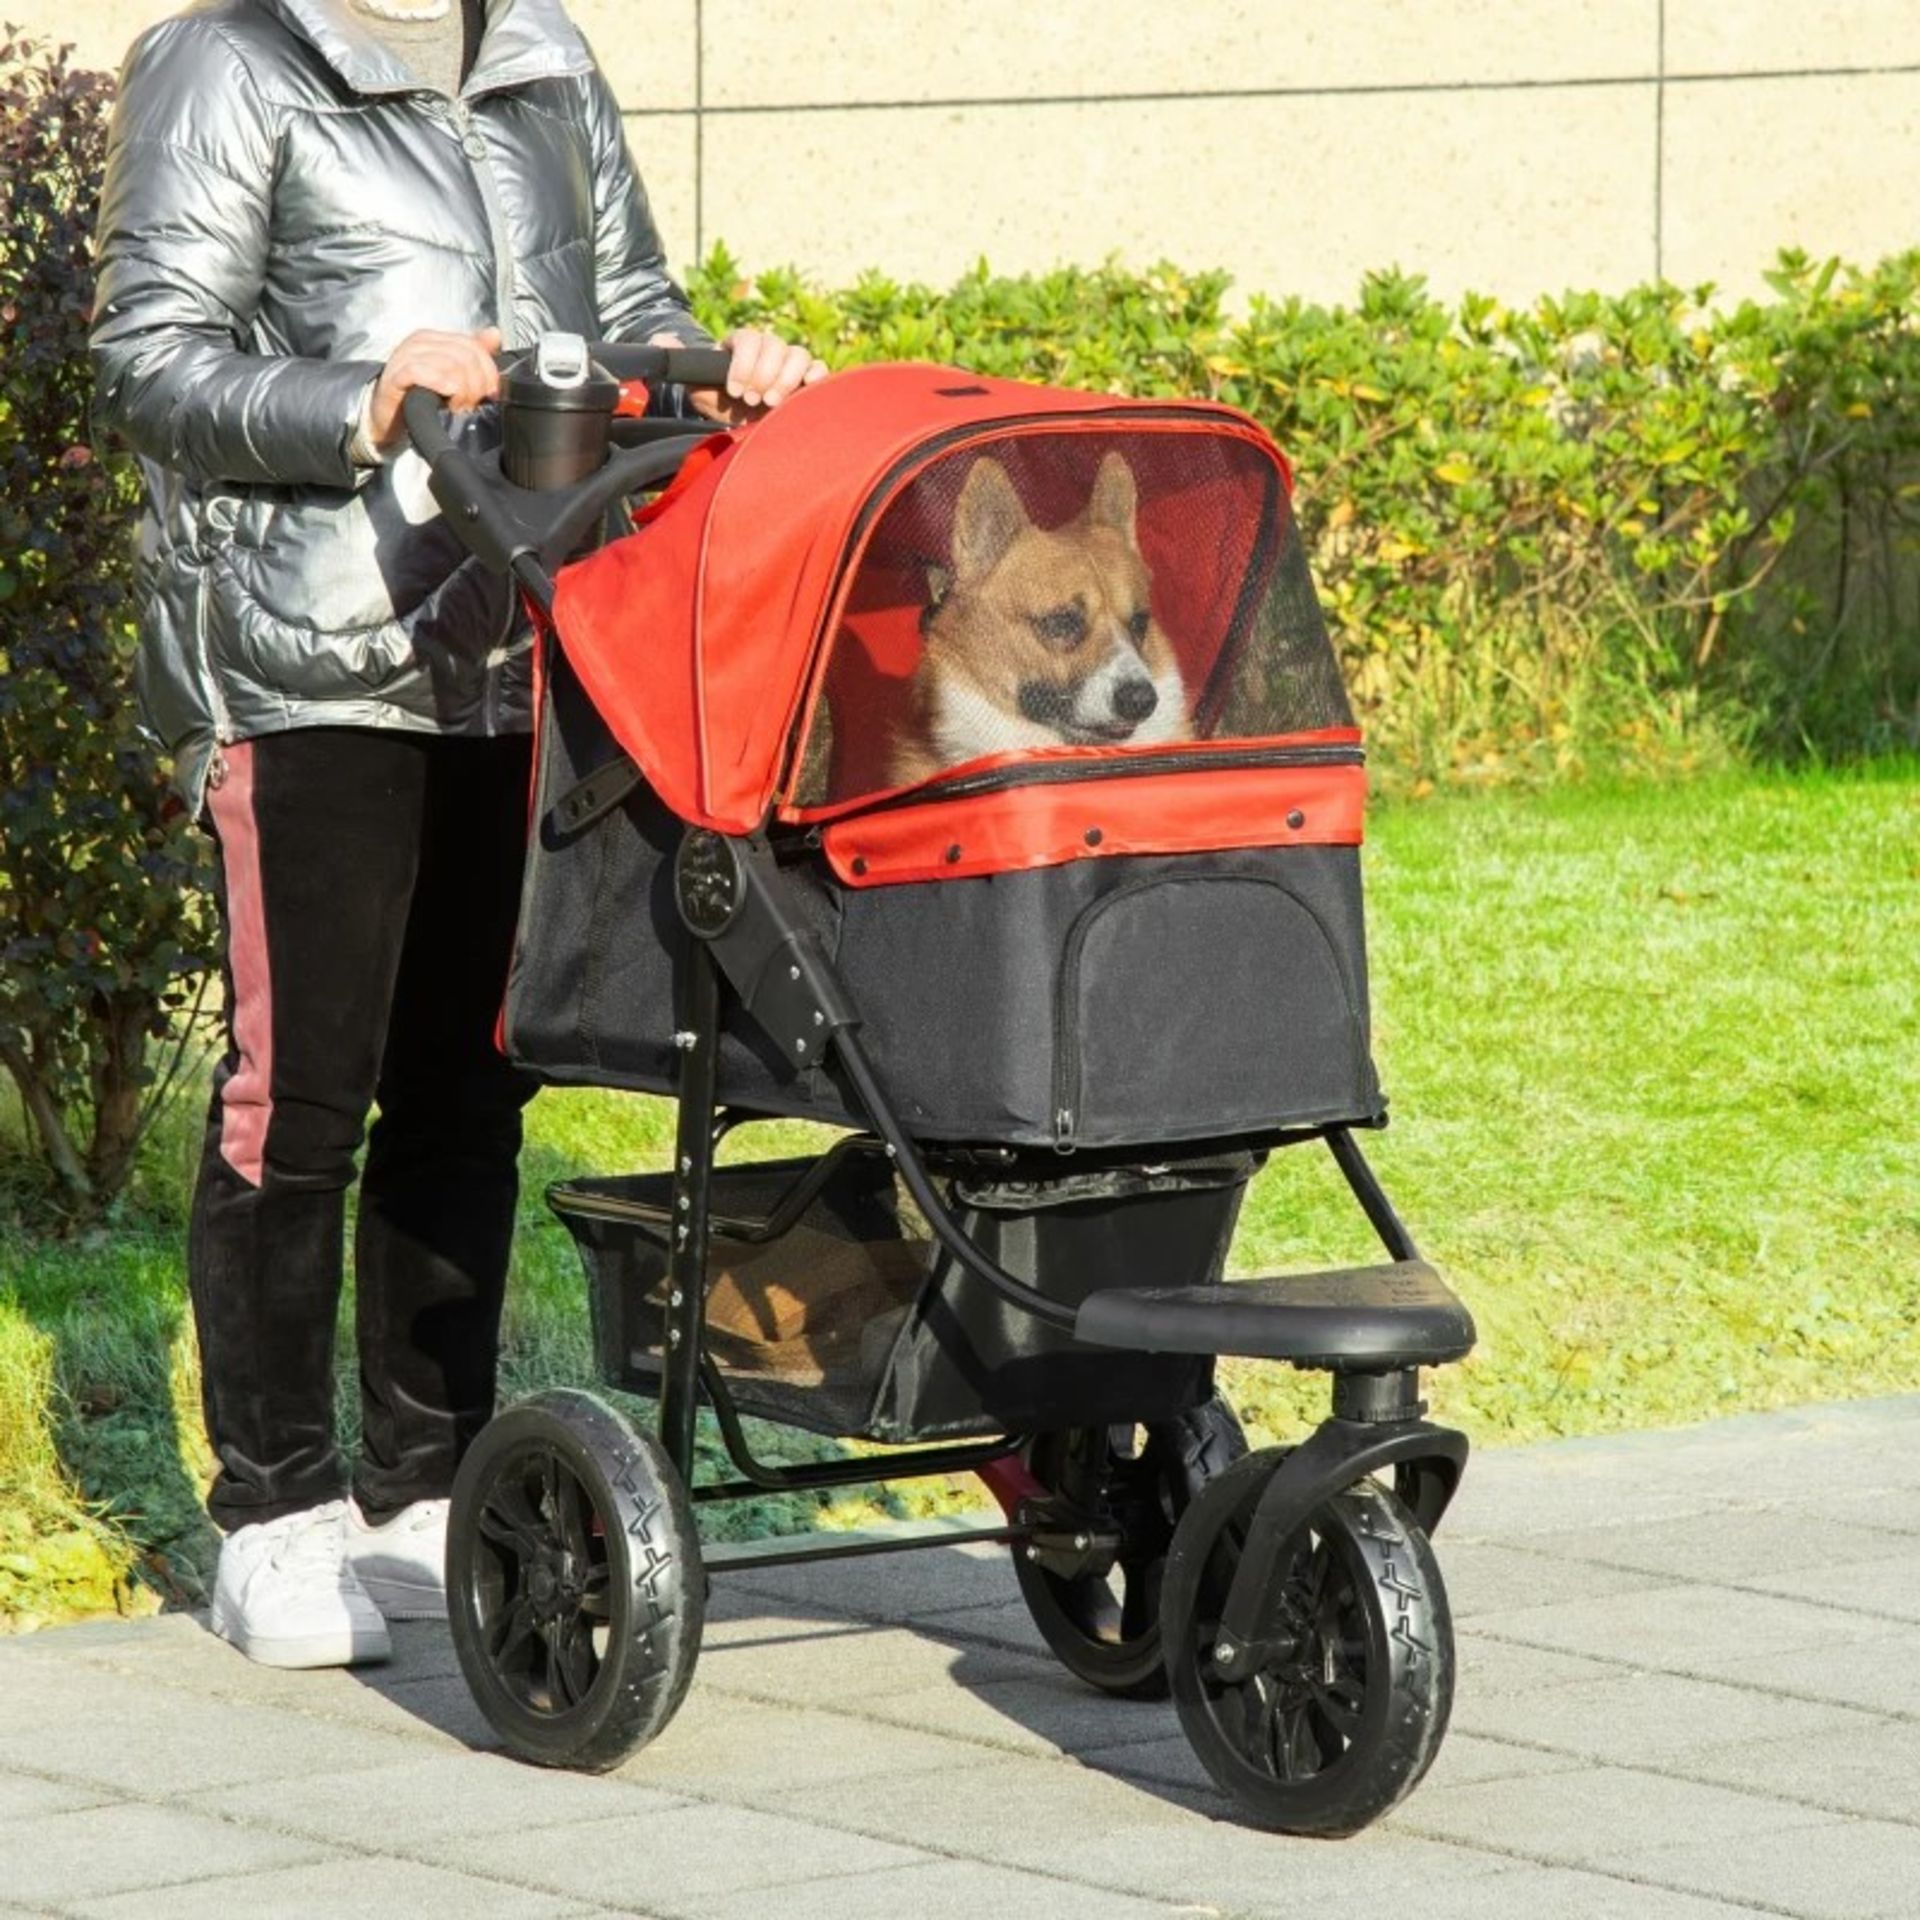 RRP £146.99 - Oxford Cloth Folding 3-Wheel Pet Stroller Dog Trolley Red/Black - 2 IN 1 DESIGN: Front